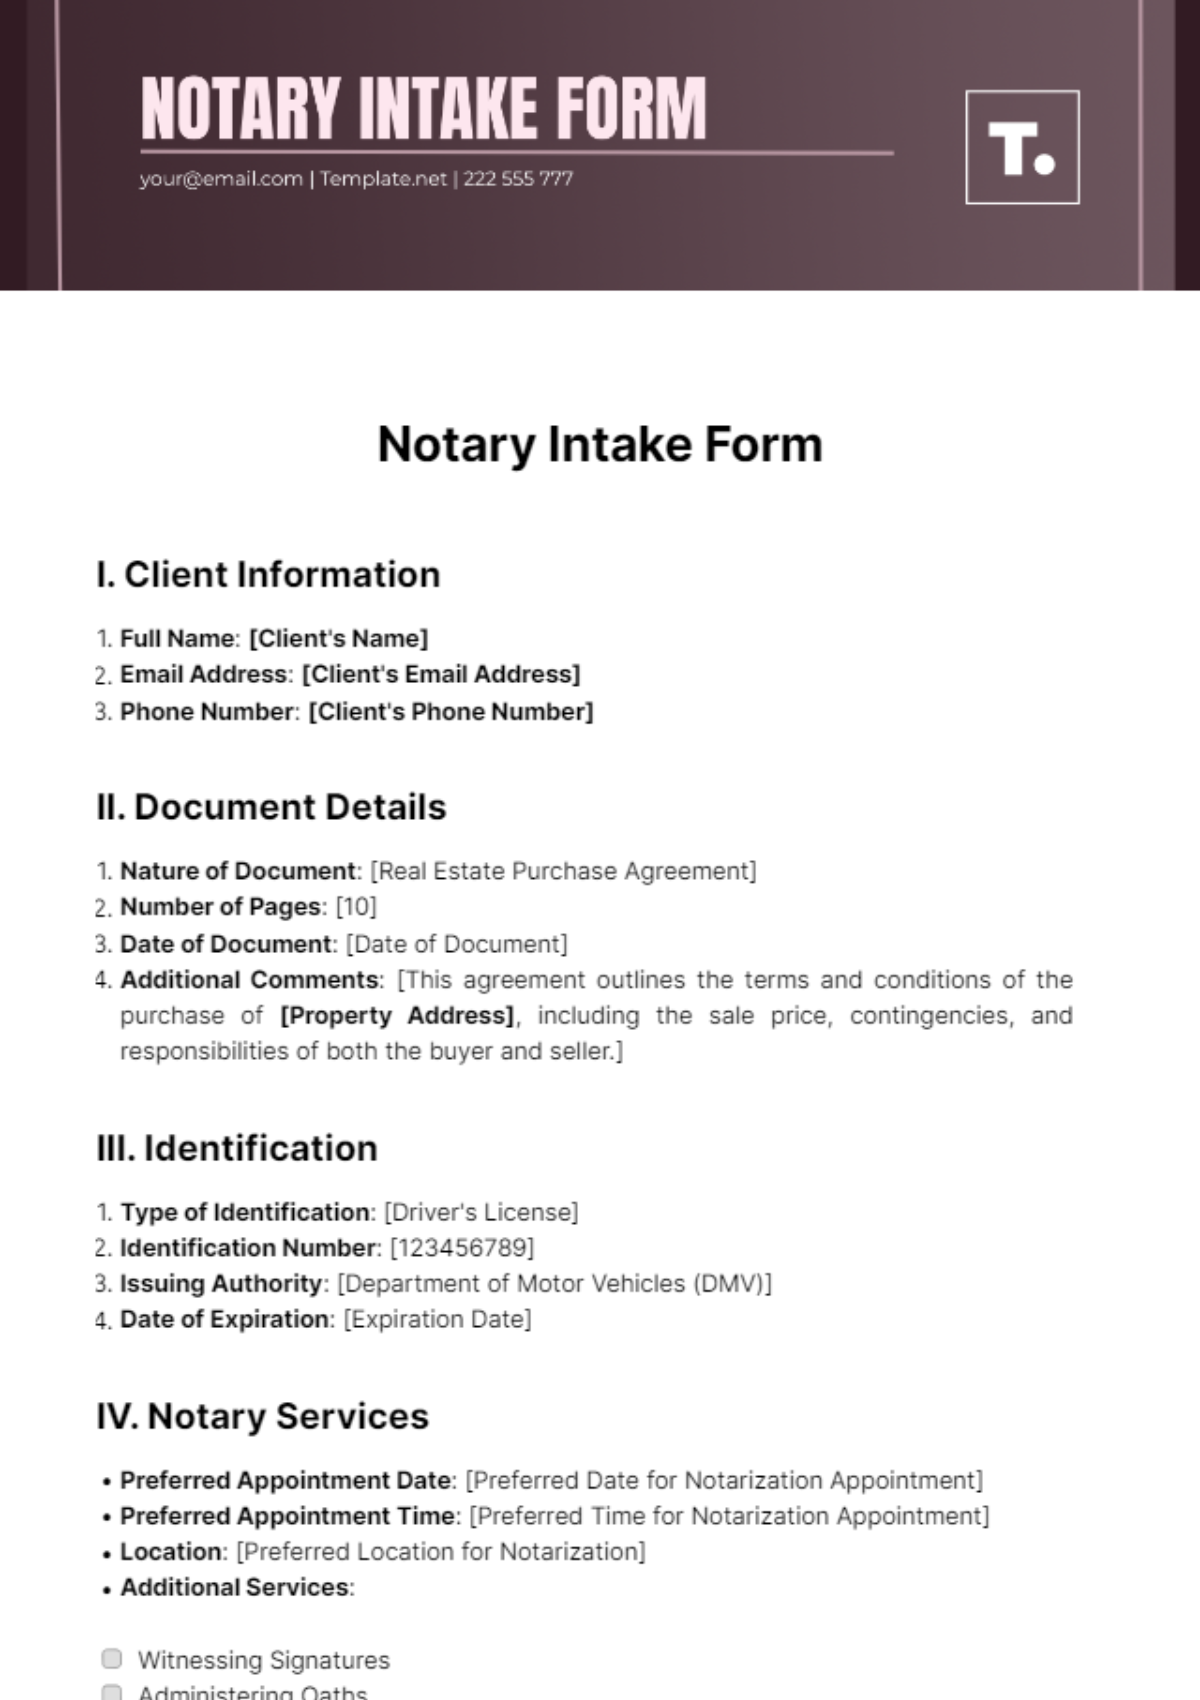 Free Notary Intake Form Template